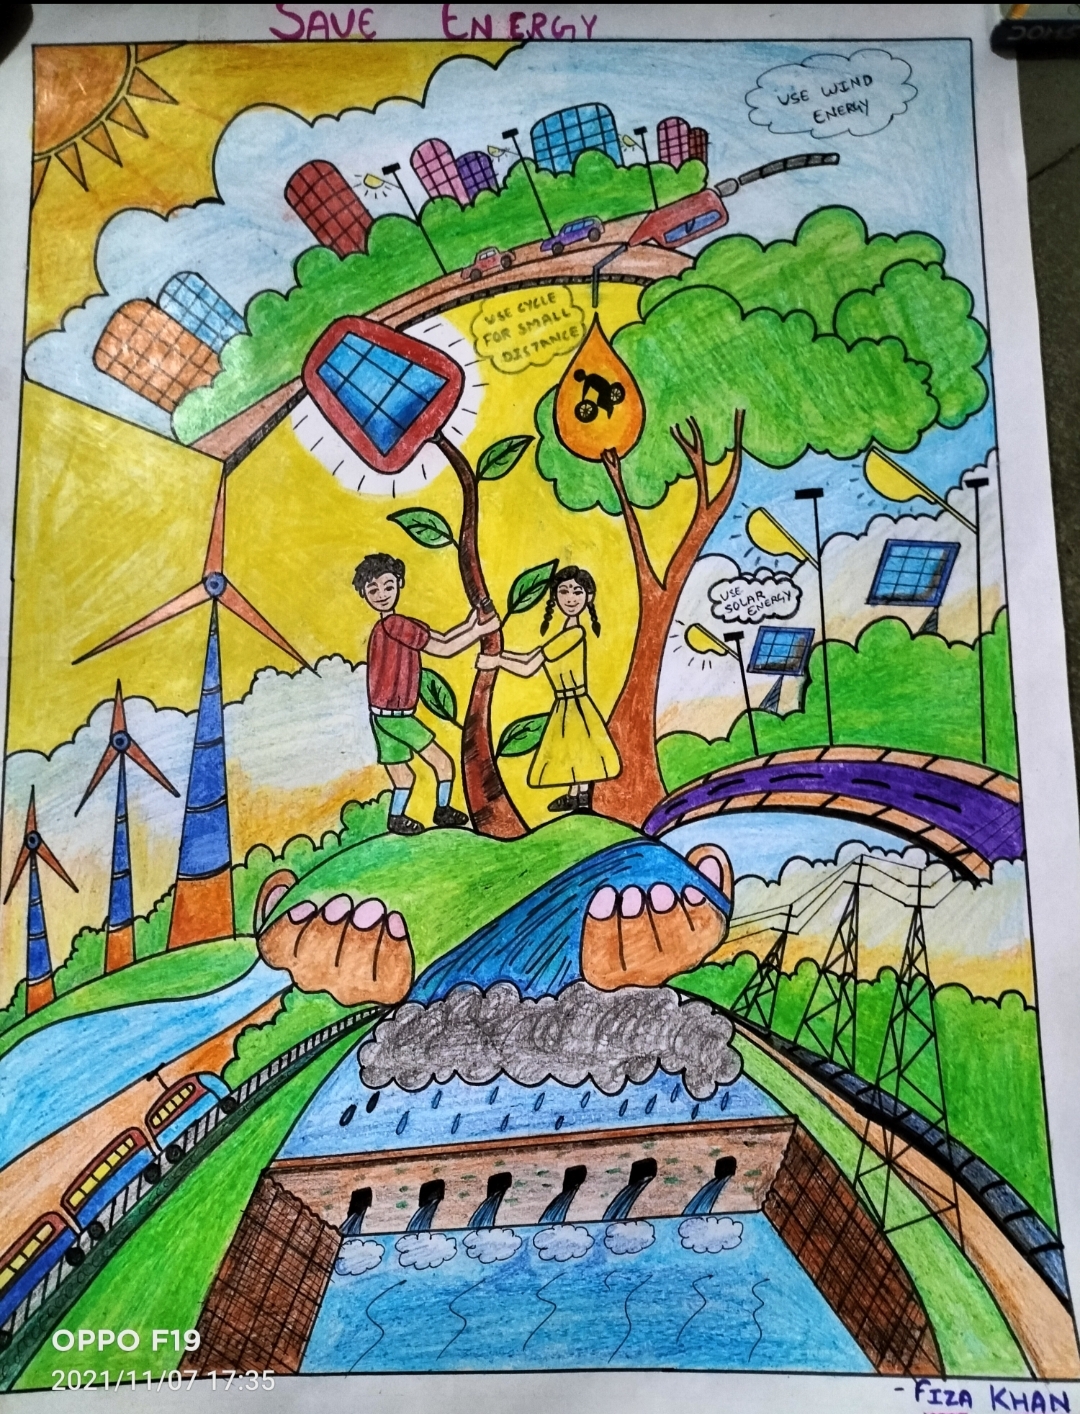 Conserve energy | Art competition ideas, Save earth drawing, Poster drawing-saigonsouth.com.vn